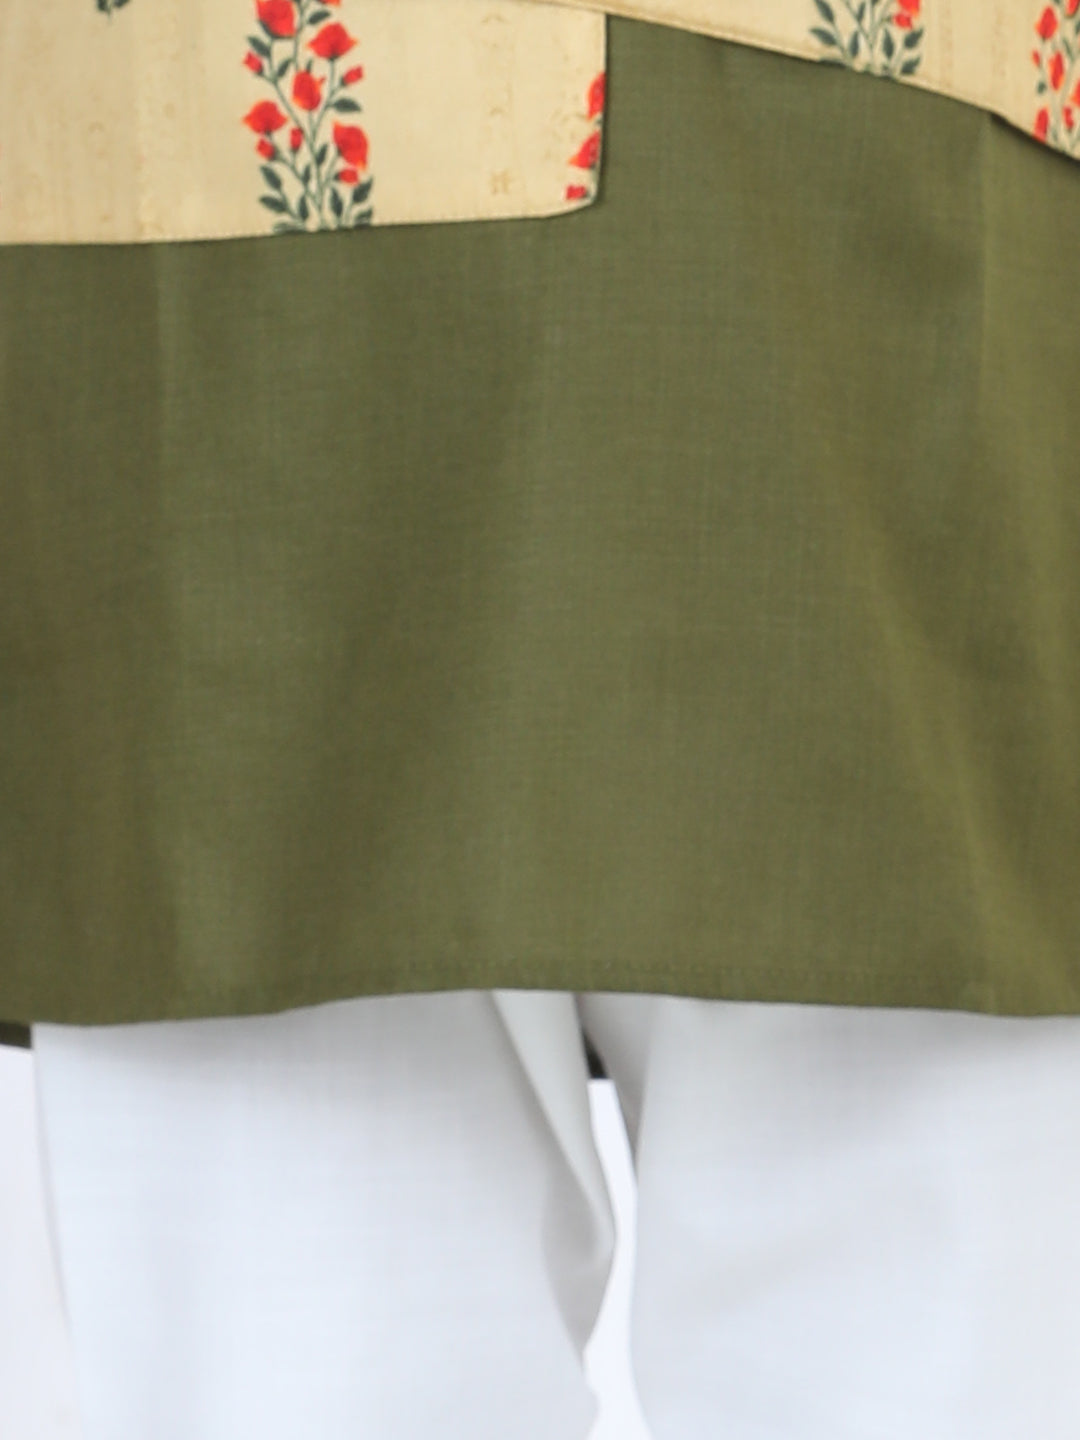 BownBee Full Sleeves Solid Kurta With Floral Printed Attached Jacket And Pyjama - Green Yellow